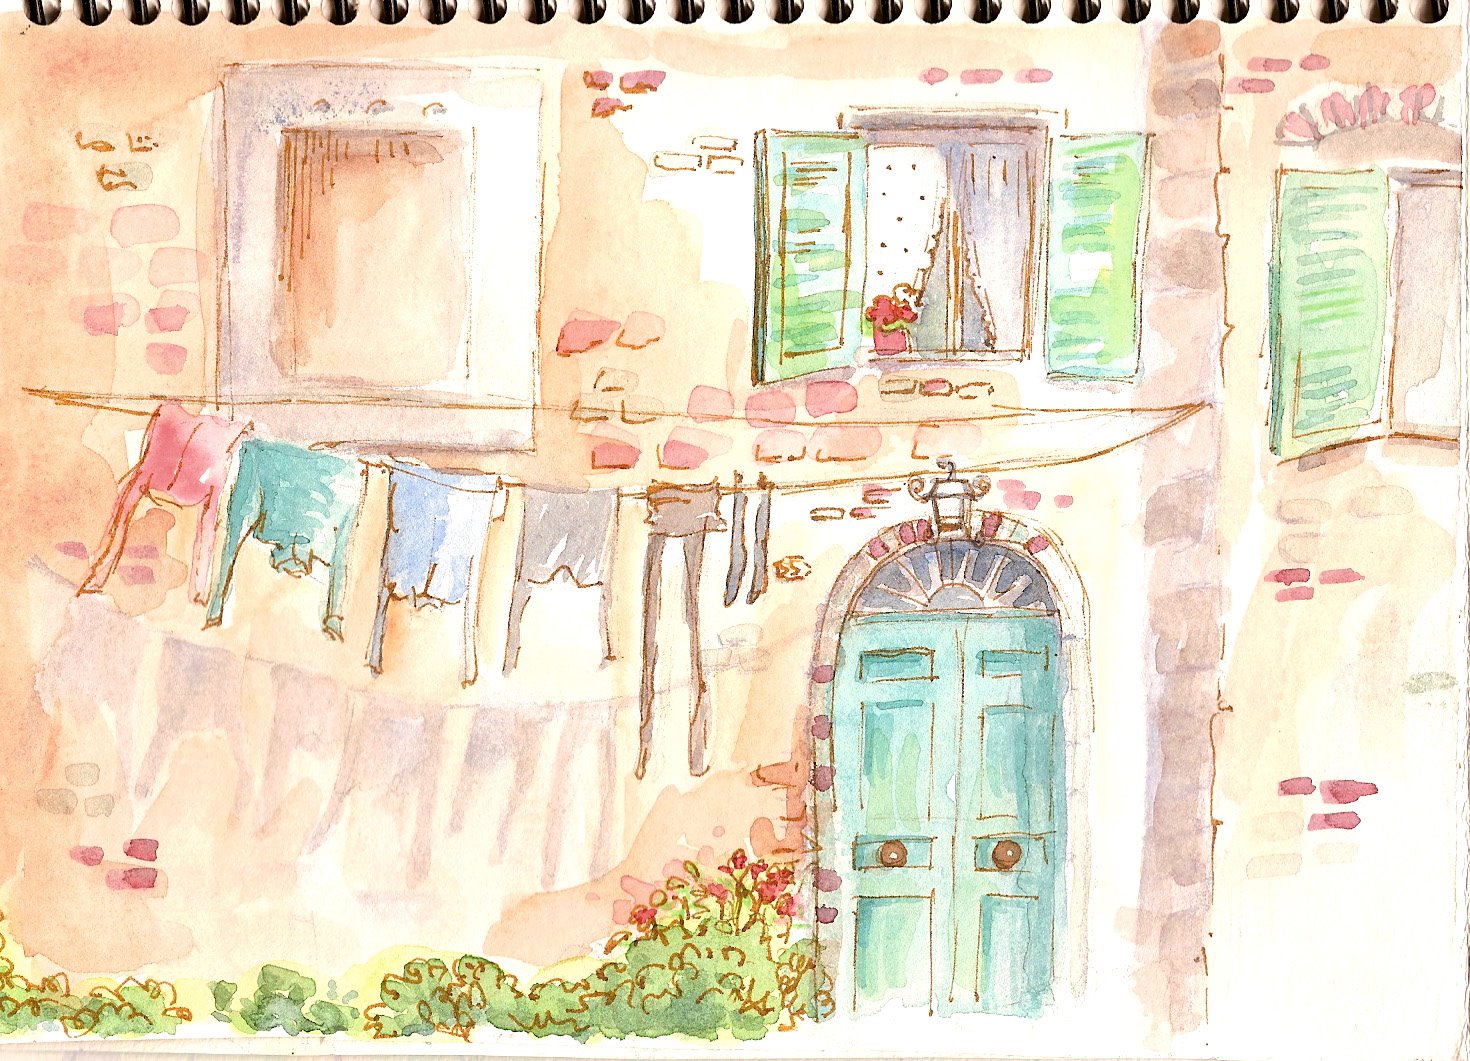 [Tuscan+laundry+from+sketchbook.jpg]